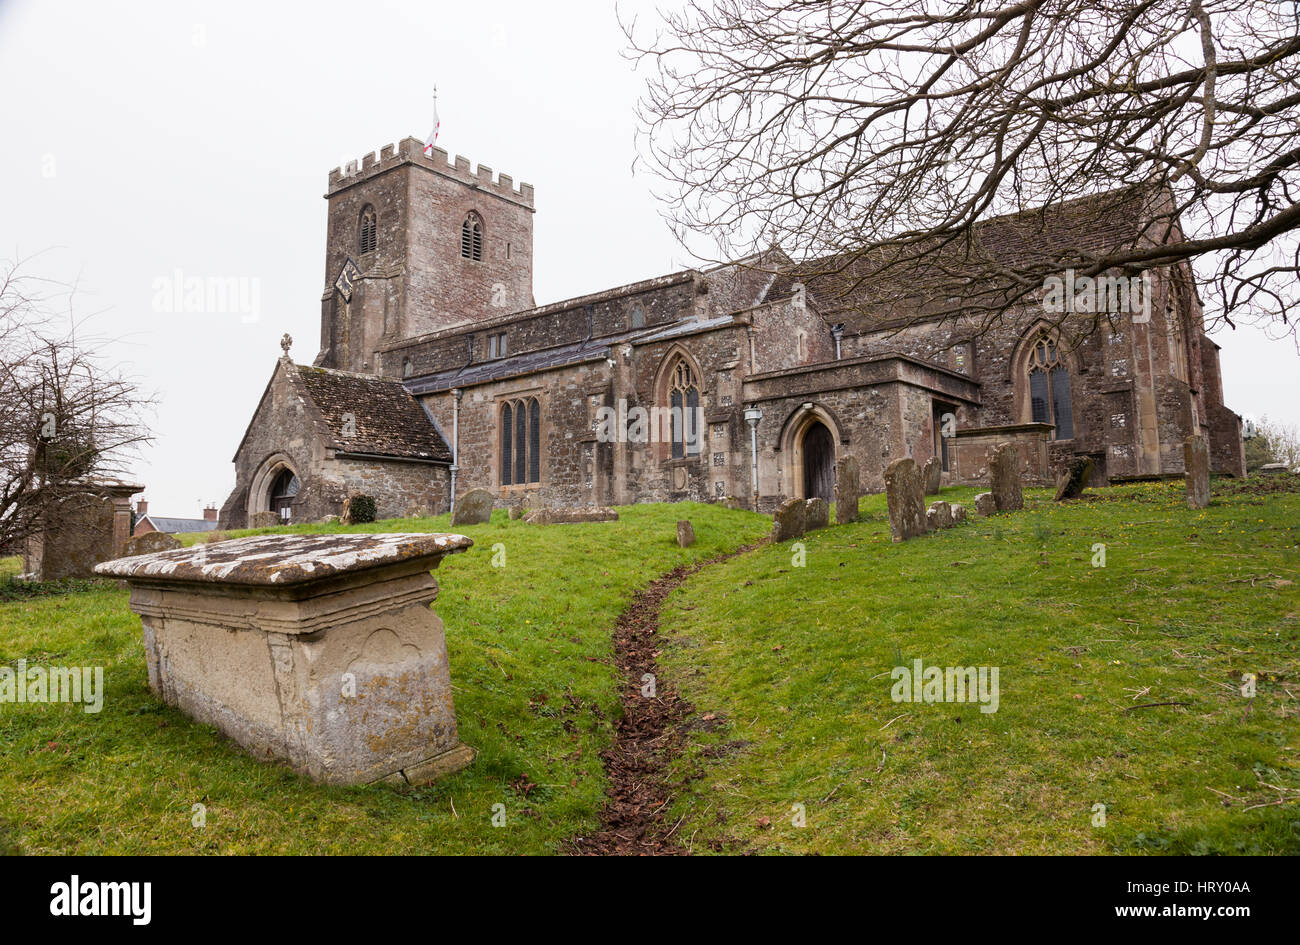 St Mary of the Assumption Church in the village of Market Lavington, Wiltshire, England, UK Stock Photo